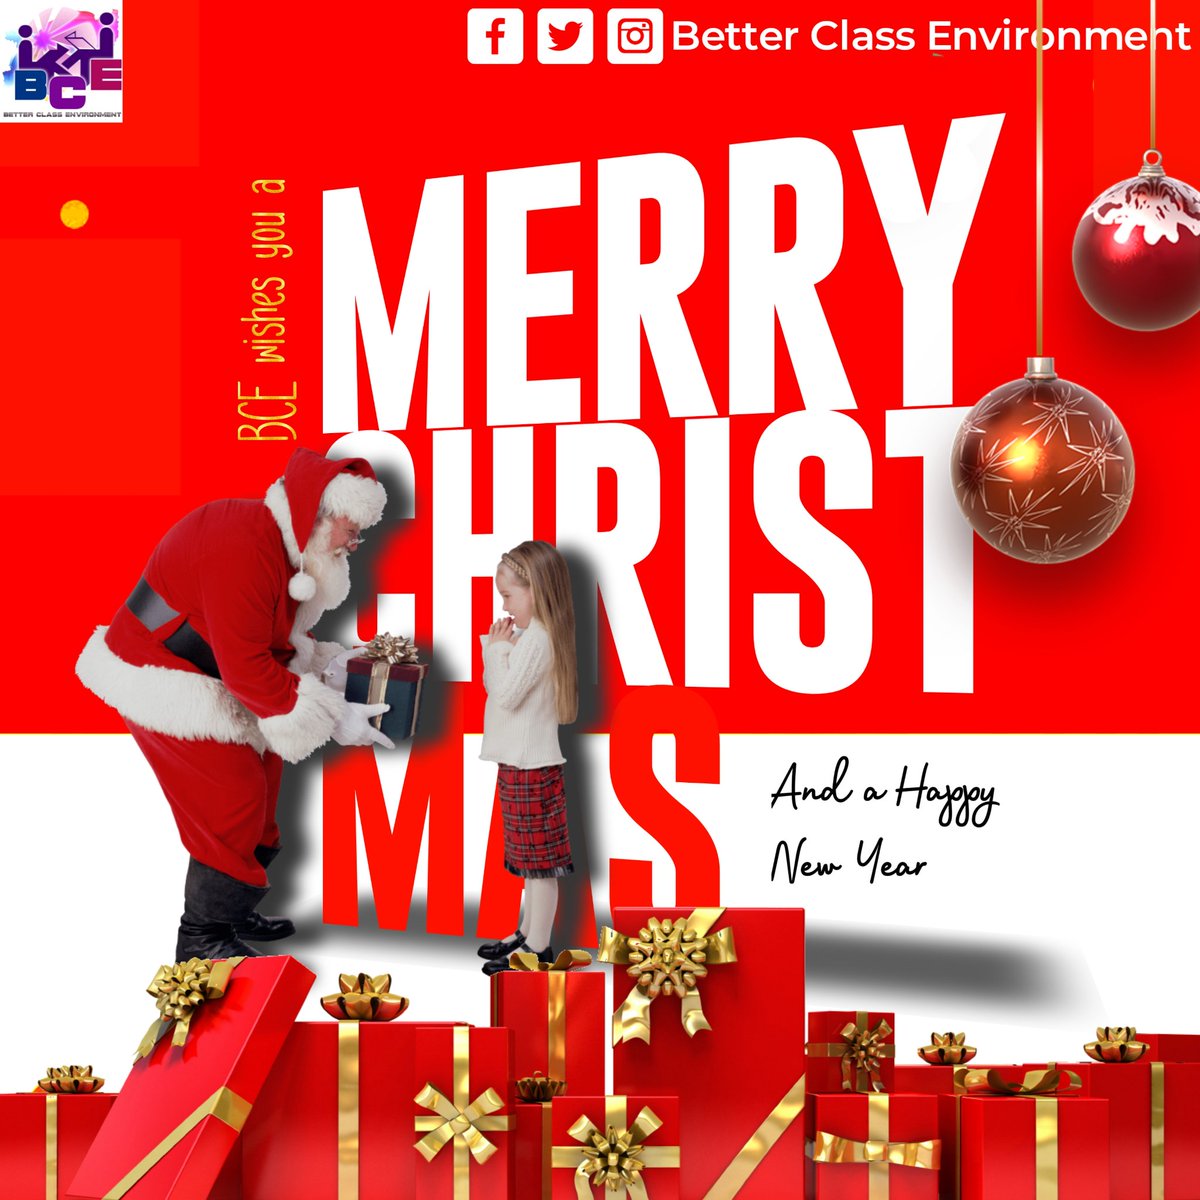 From the #BCEteam, we are Wishing you a Christmas full of Happiness and Peace. Merry Christmas!🎄❤️🎄

#merrychristmas #seasonsgreetings #betterclassrooms #BetterClassEnvironment